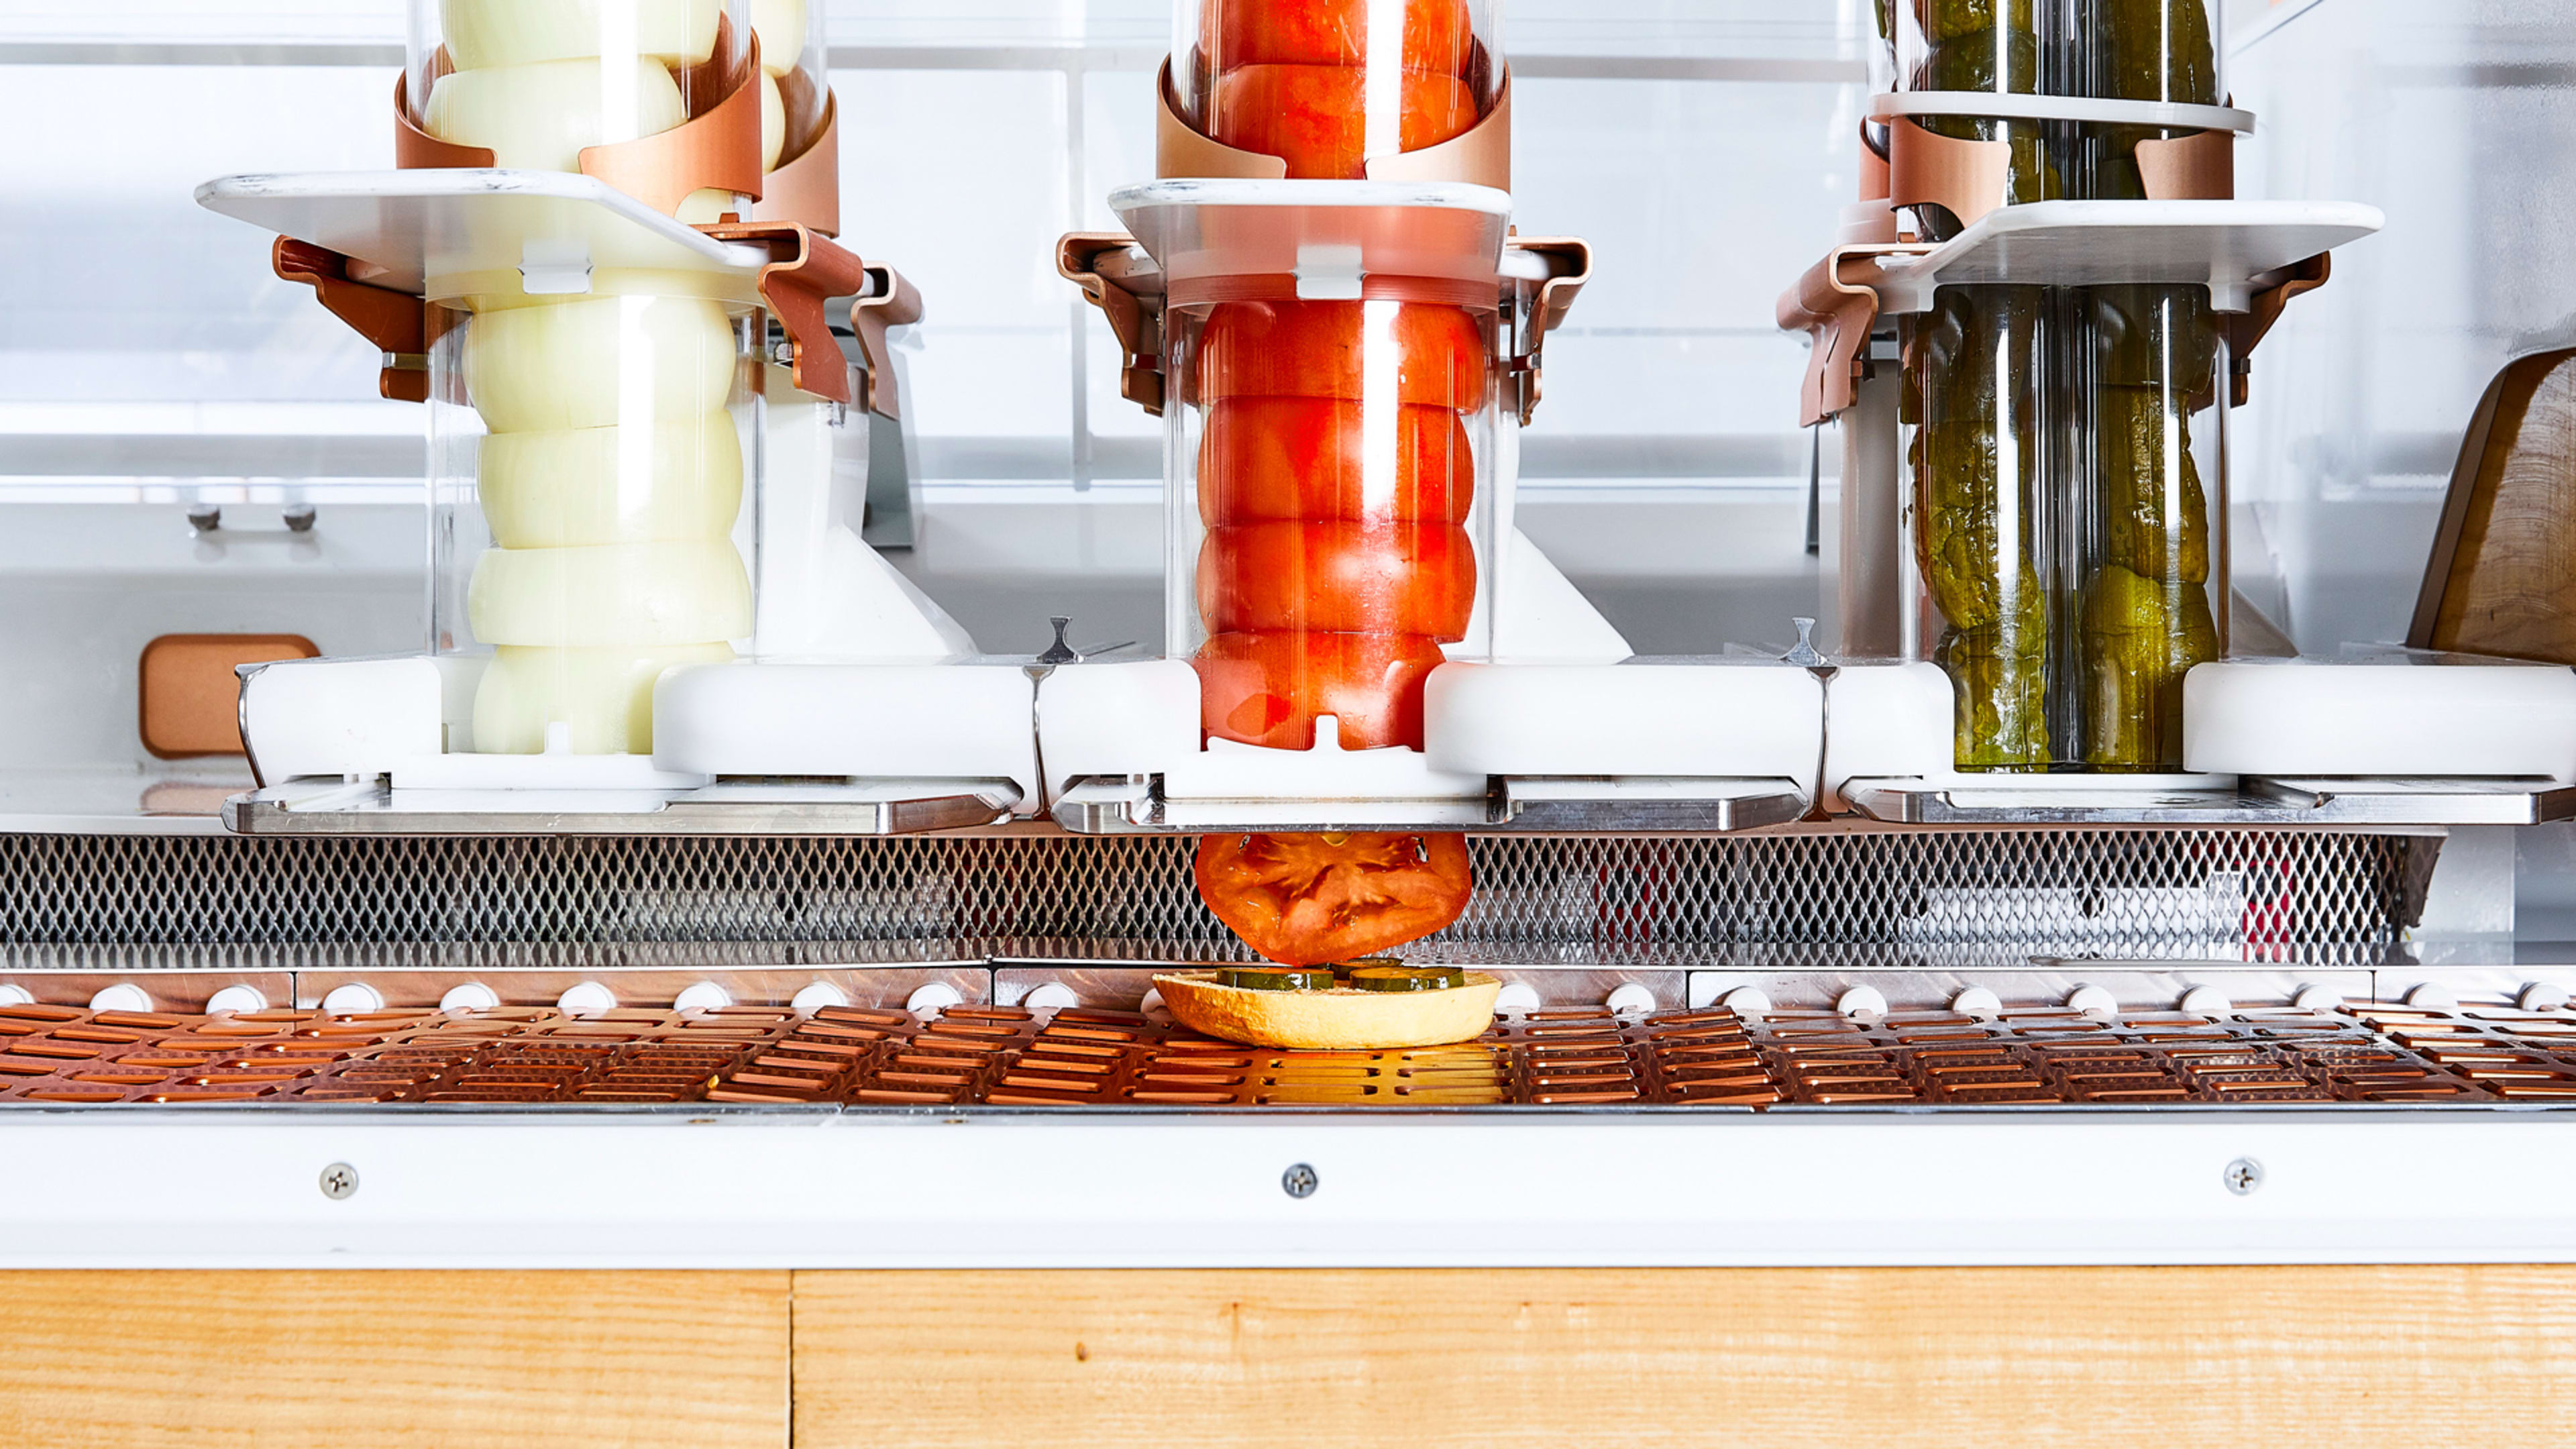 This crazy-looking robot is the chef at a new burger joint